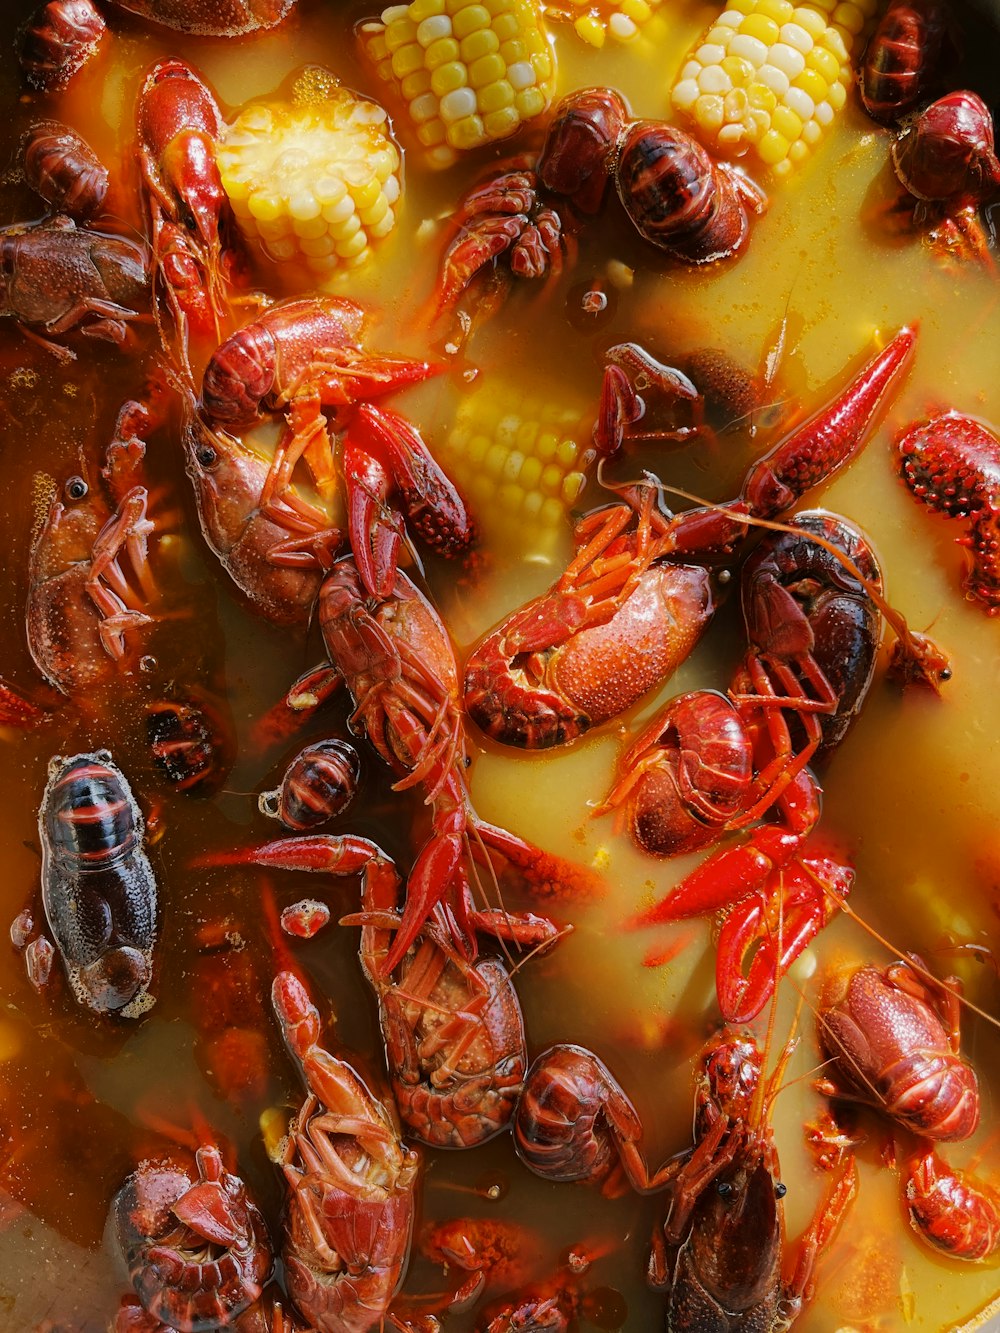 crawfish, corn, and corn on the cob in a pot of